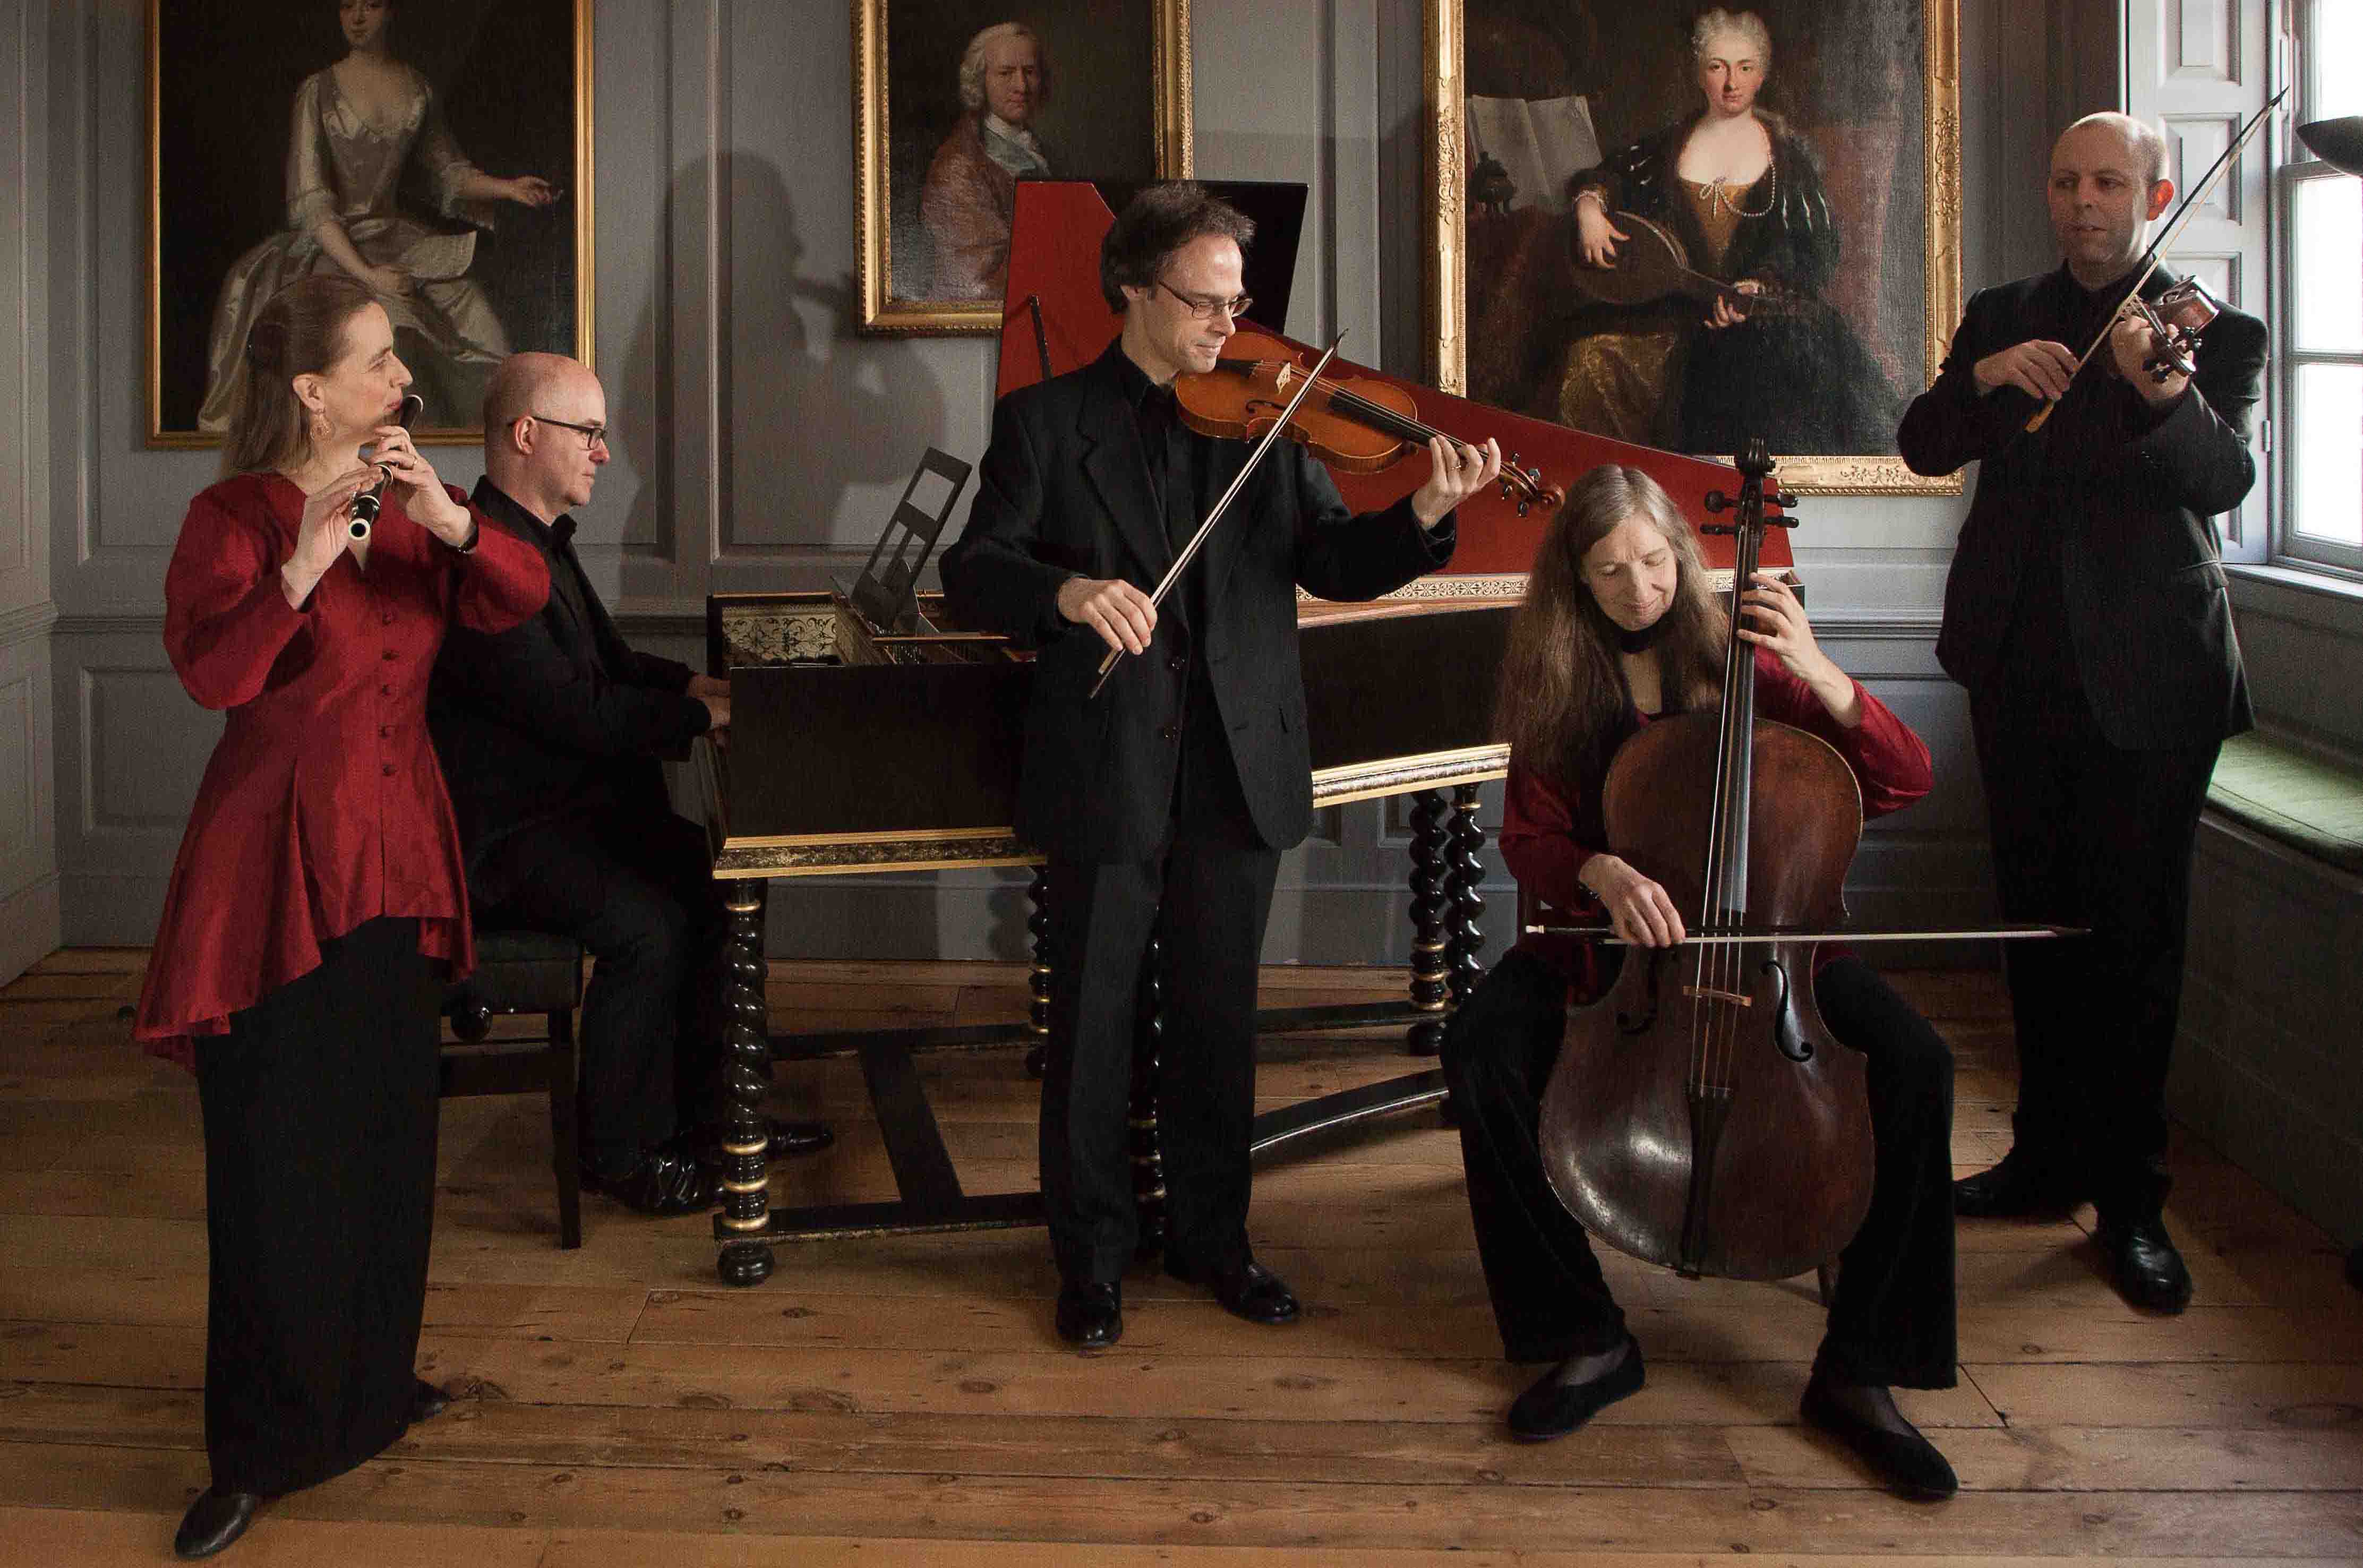 The London Handel Players will present a programme of Baroque dance in full 18th-century costume, with baroque dancers Mary Collins and Steven Player